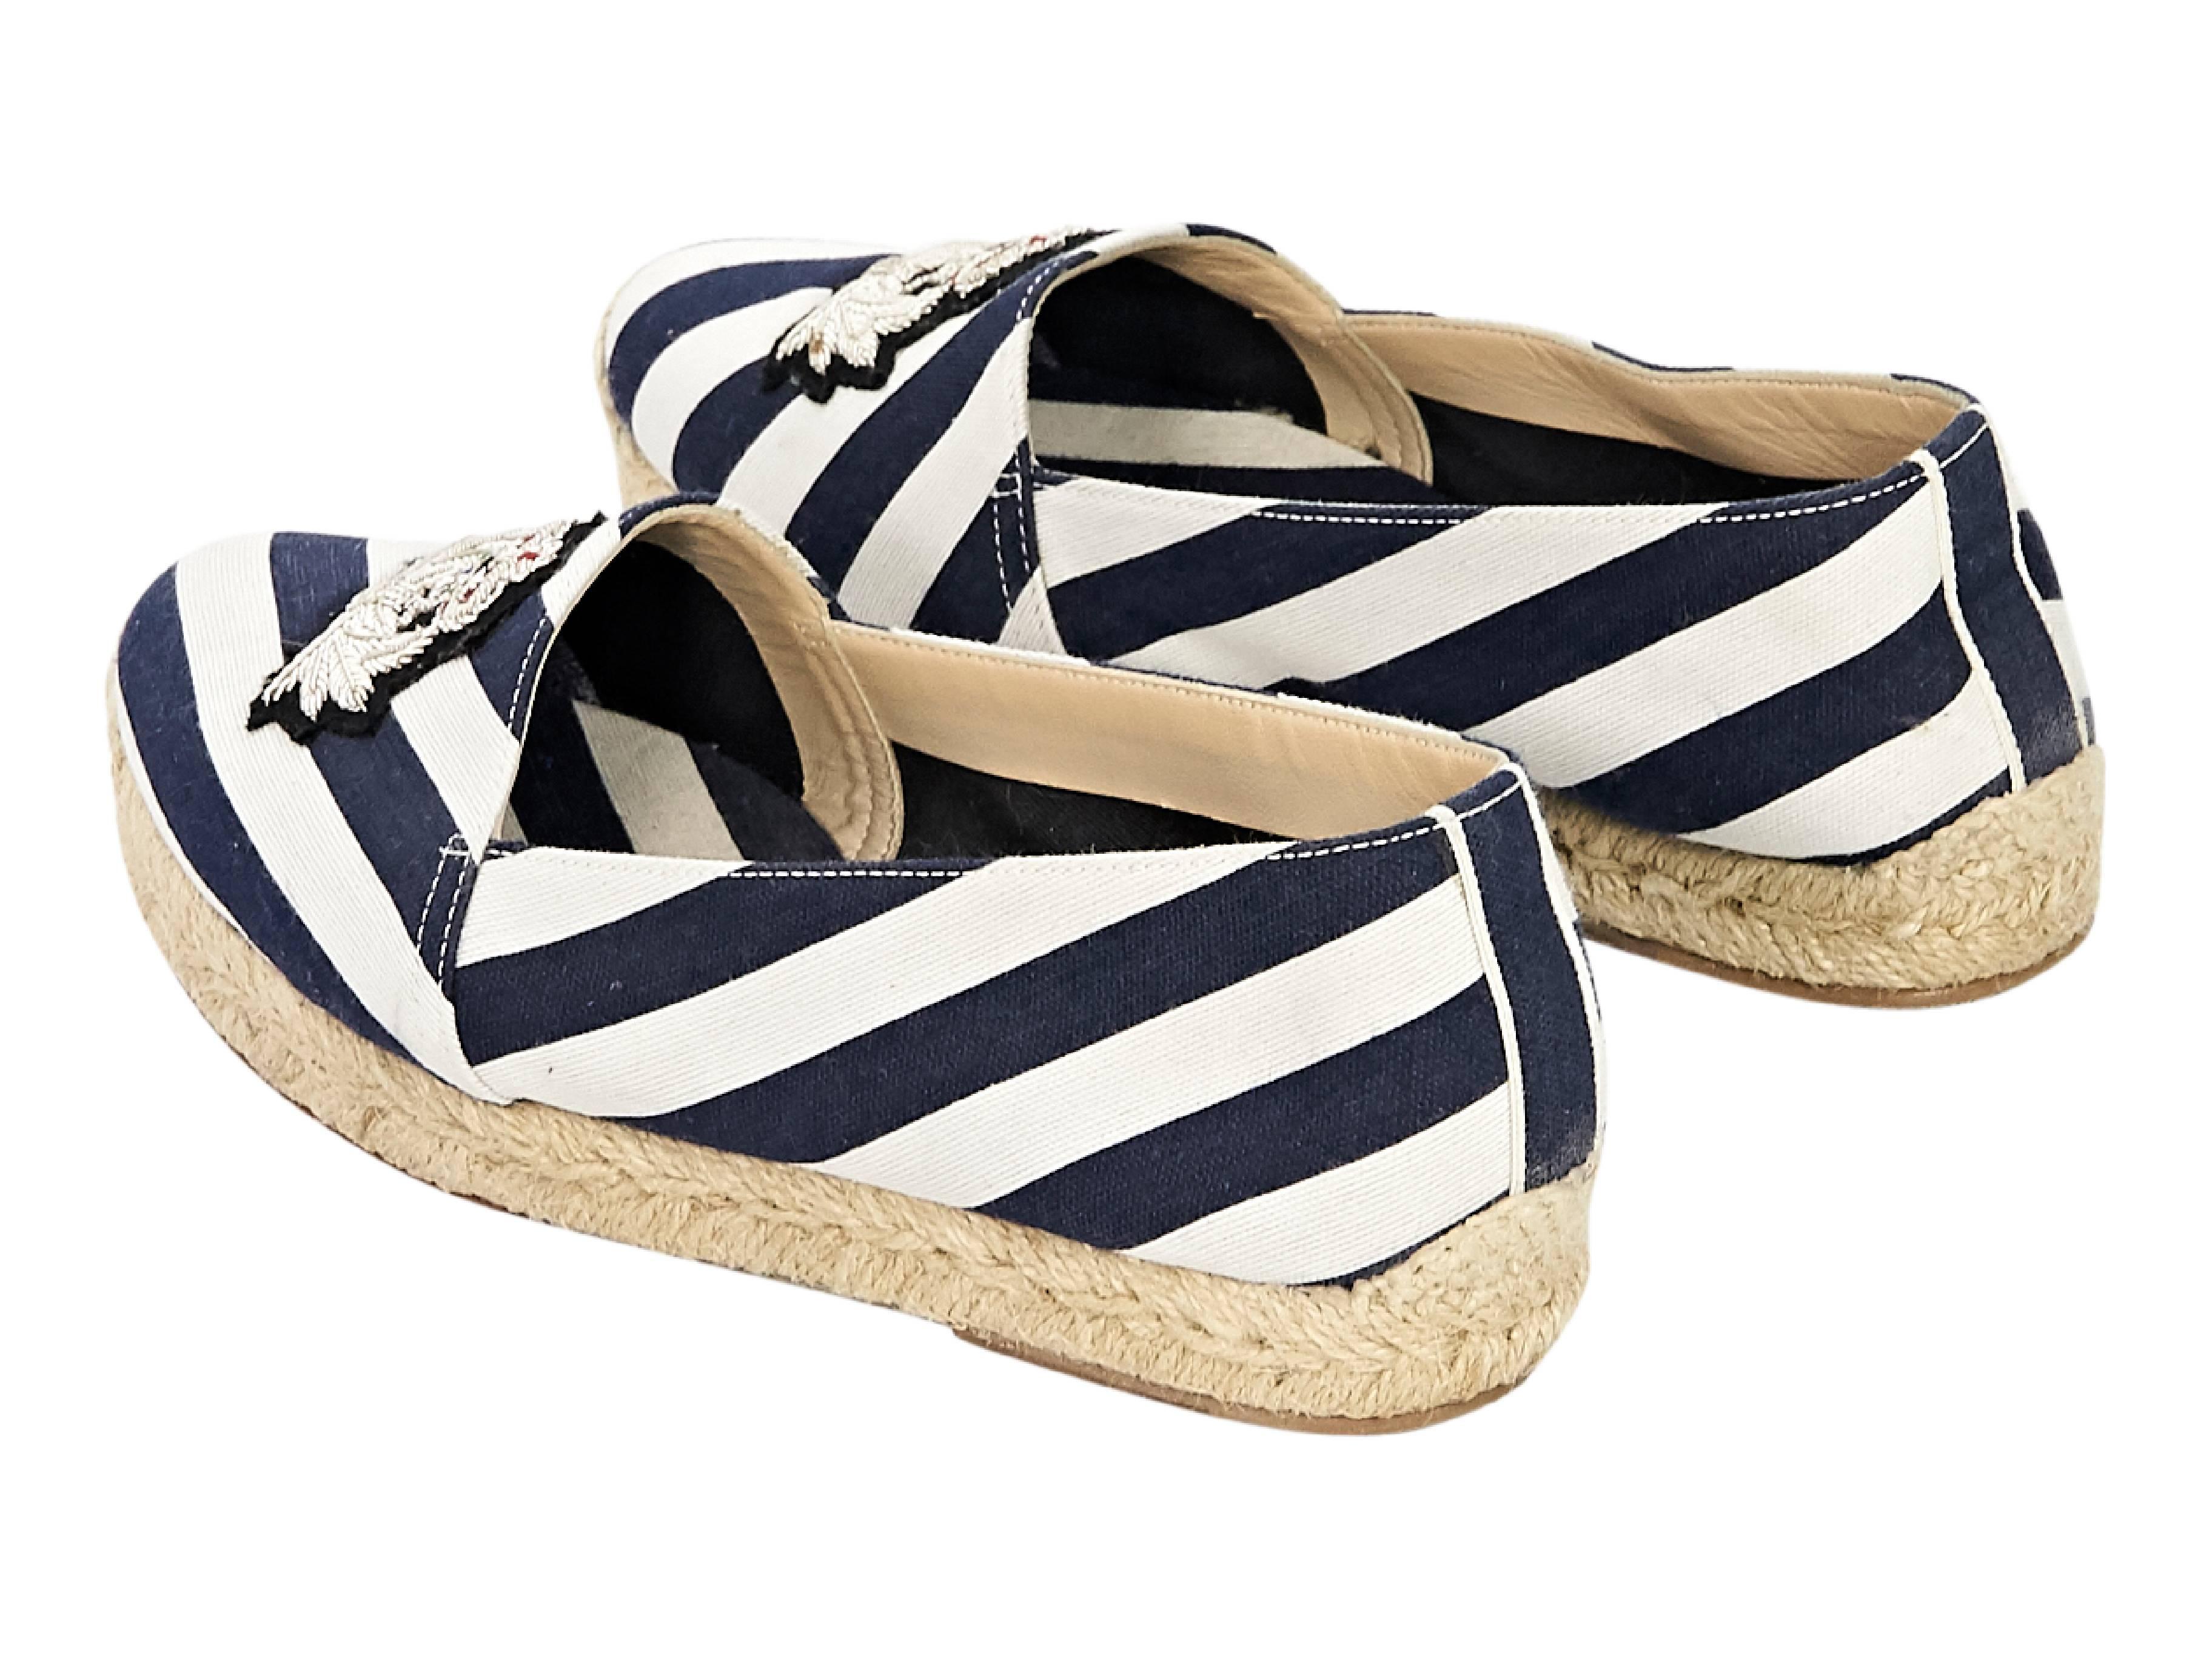 navy and white striped espadrilles